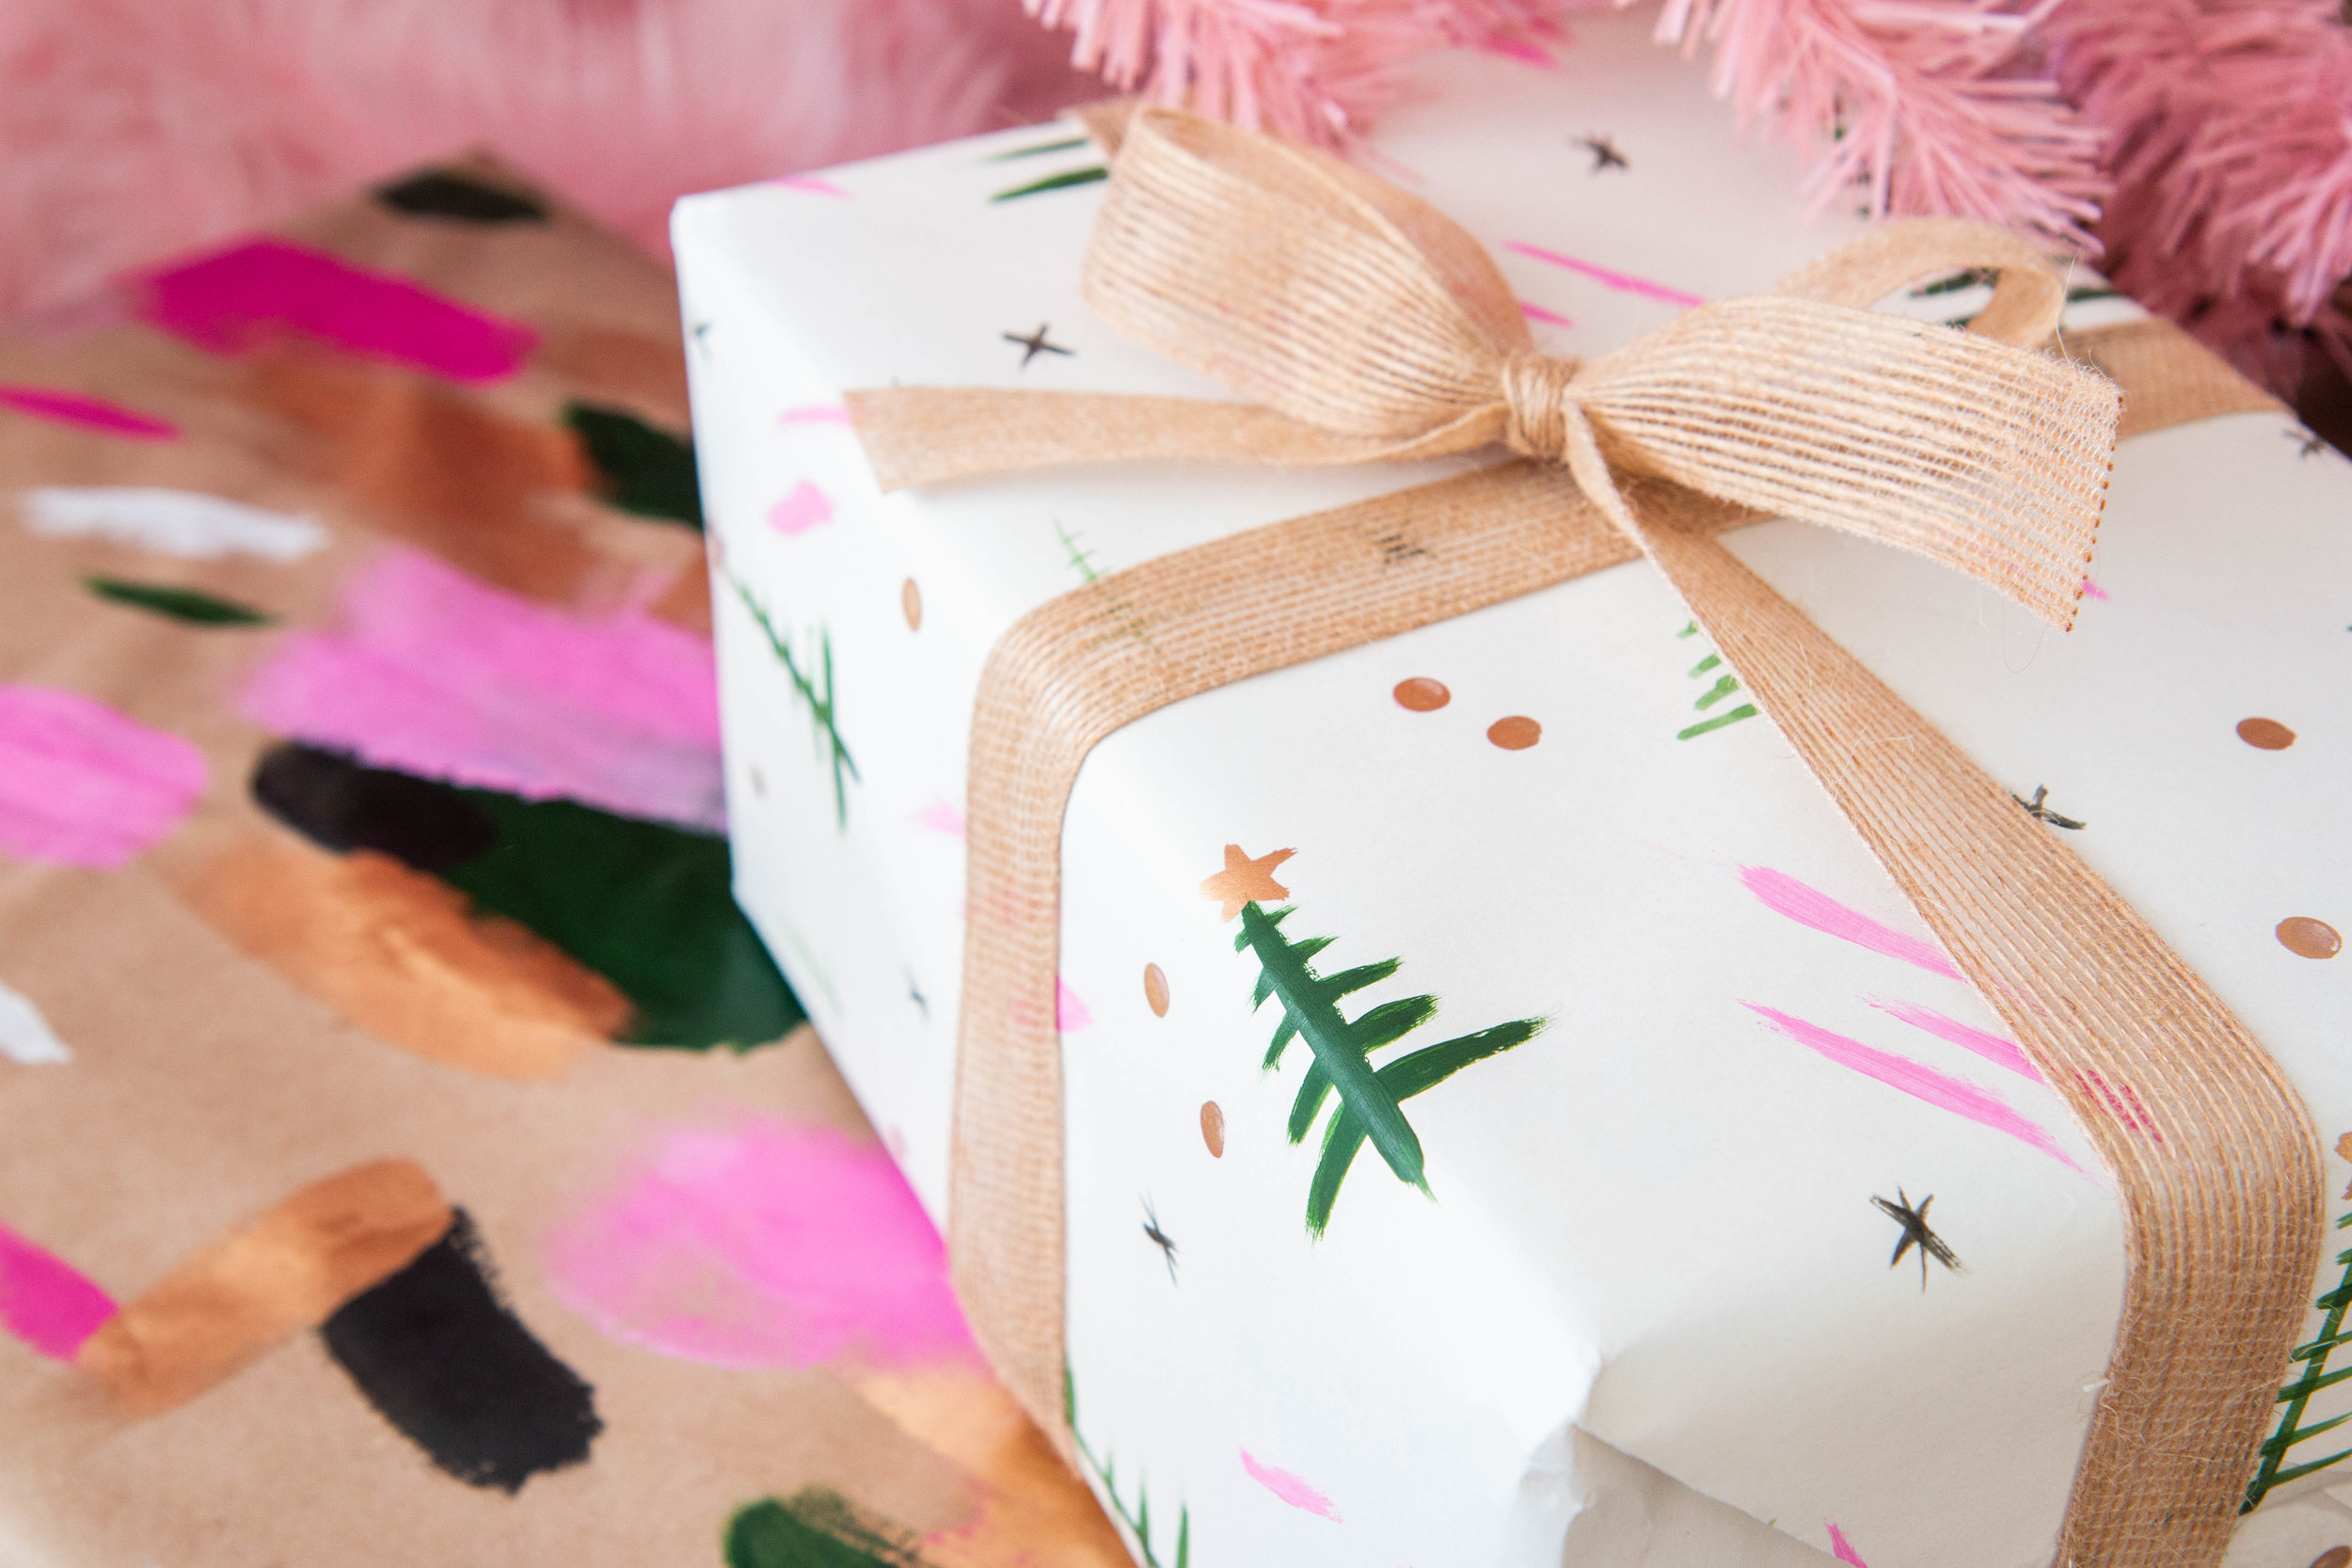 Creative Gift Wrapping with Pom Poms - The Make Your Own Zone